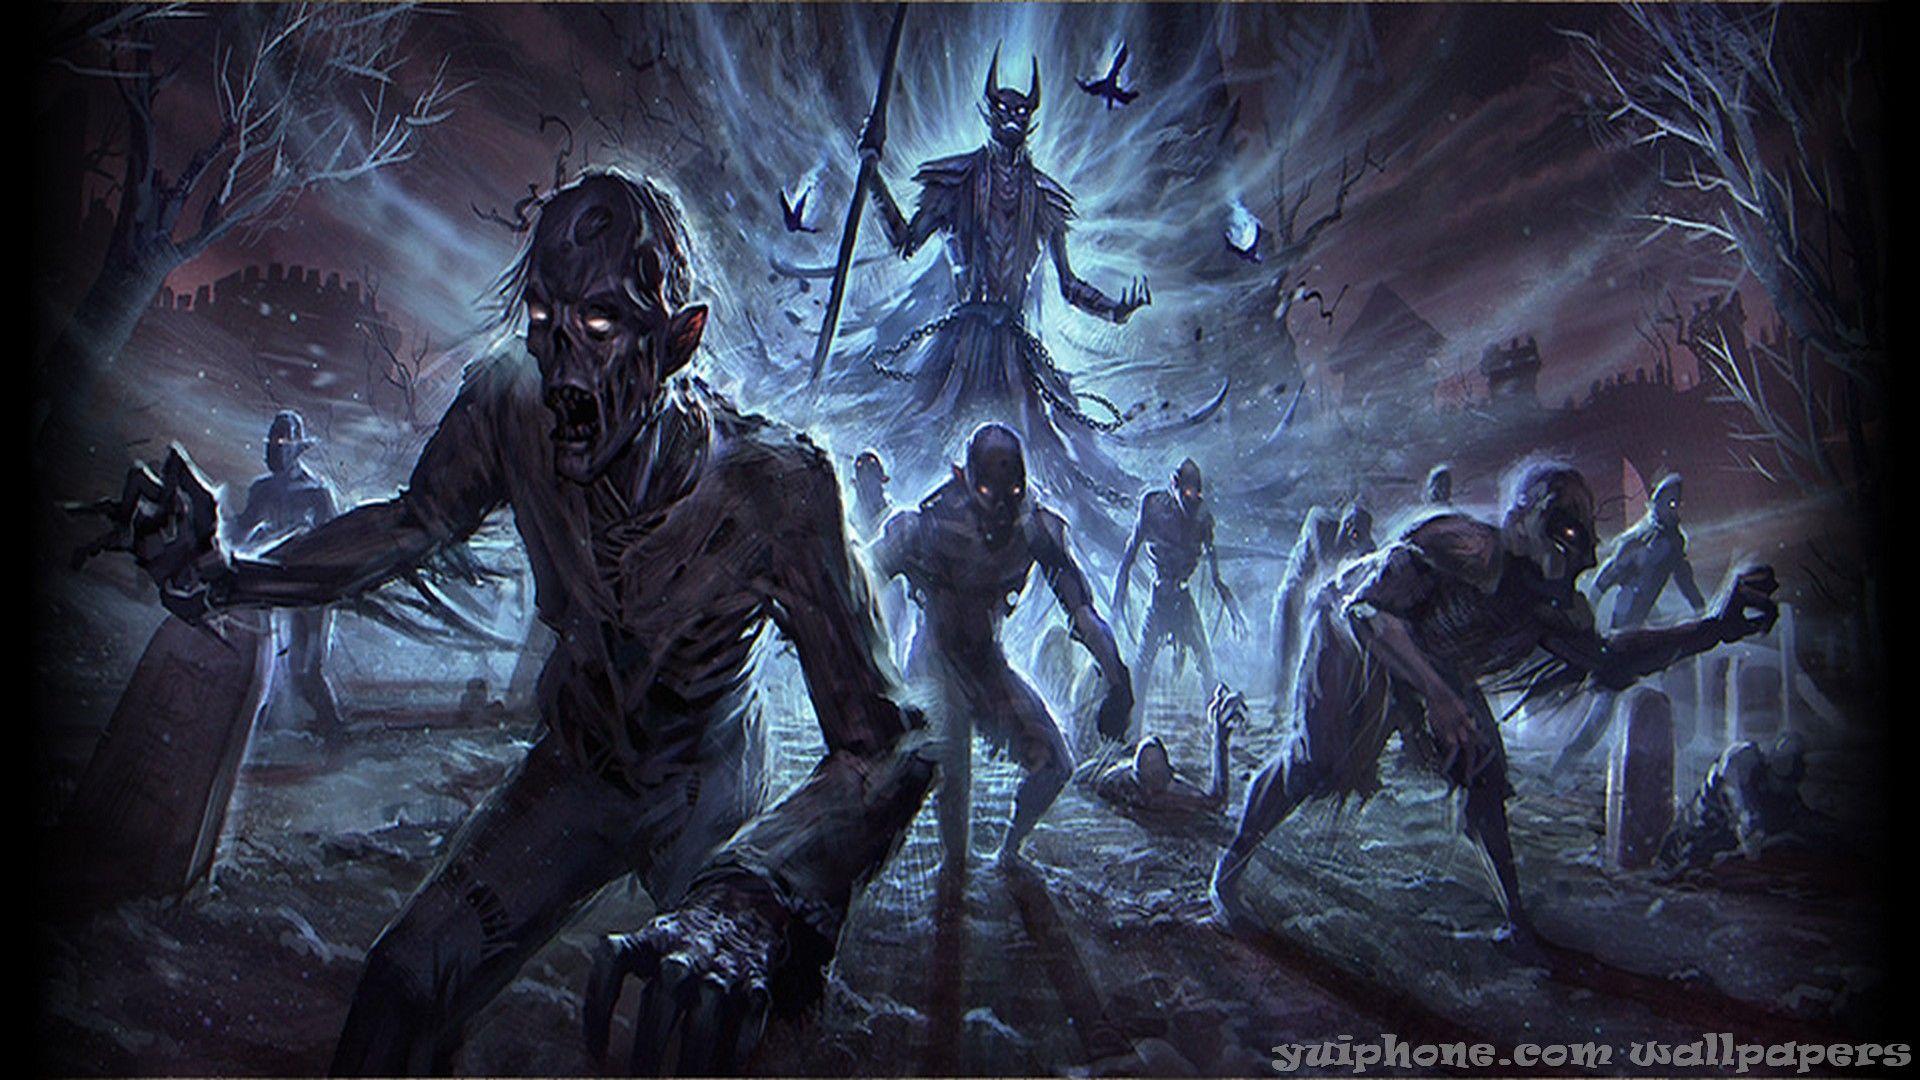 Story Of ESO The Elder Scrolls Online Concept Art And Wallpaper